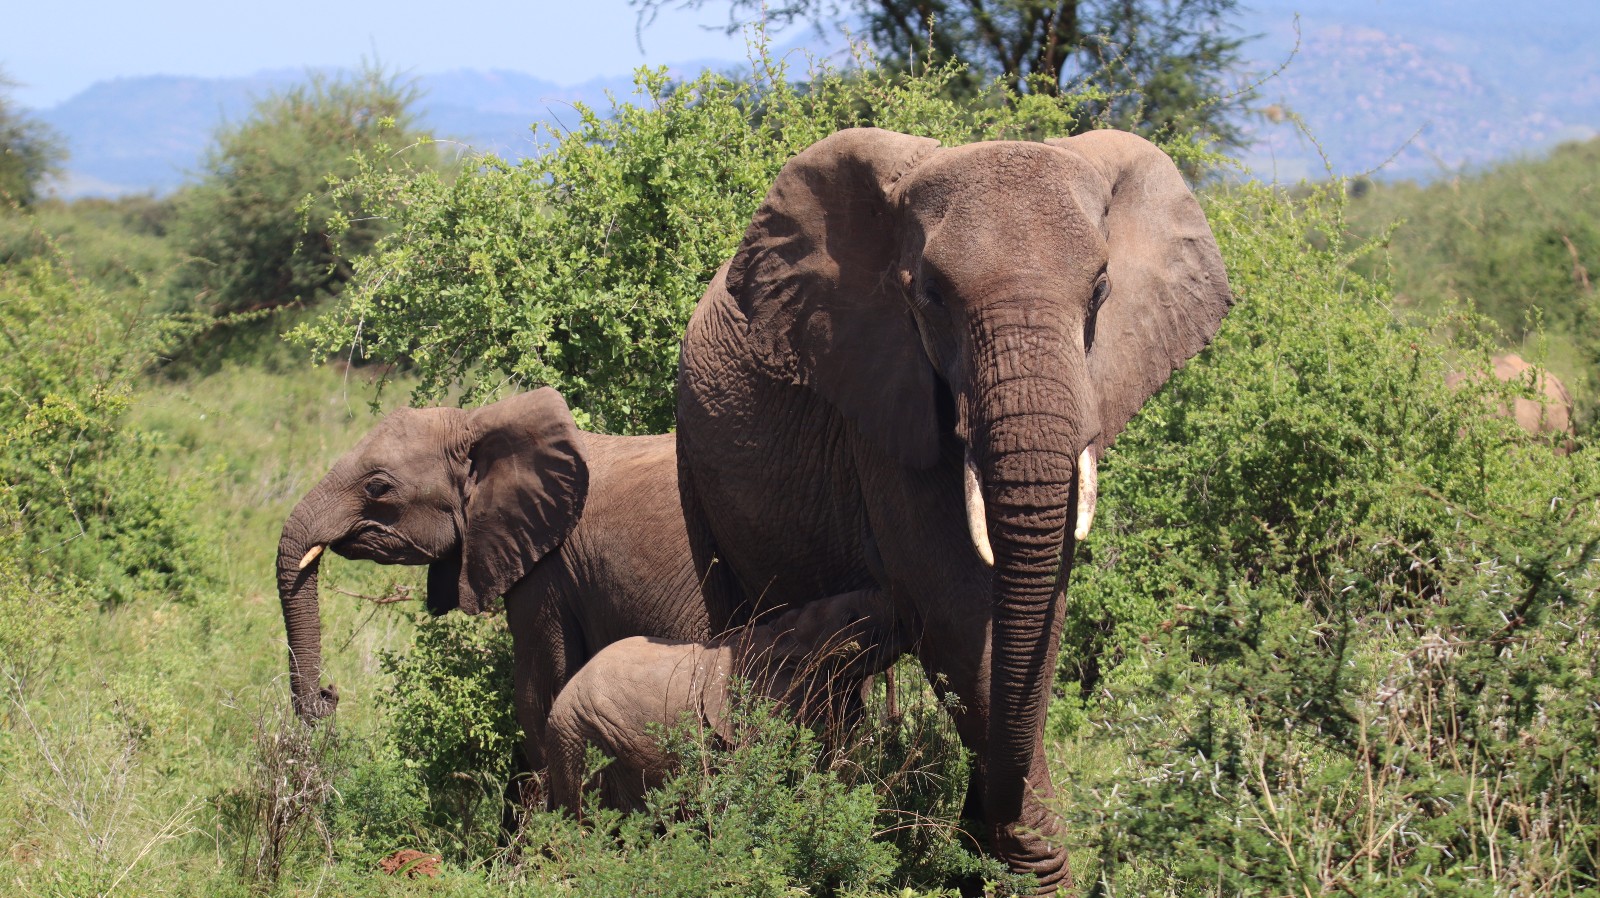 A photo of an adult, sub-adult and baby elephant in Kenya